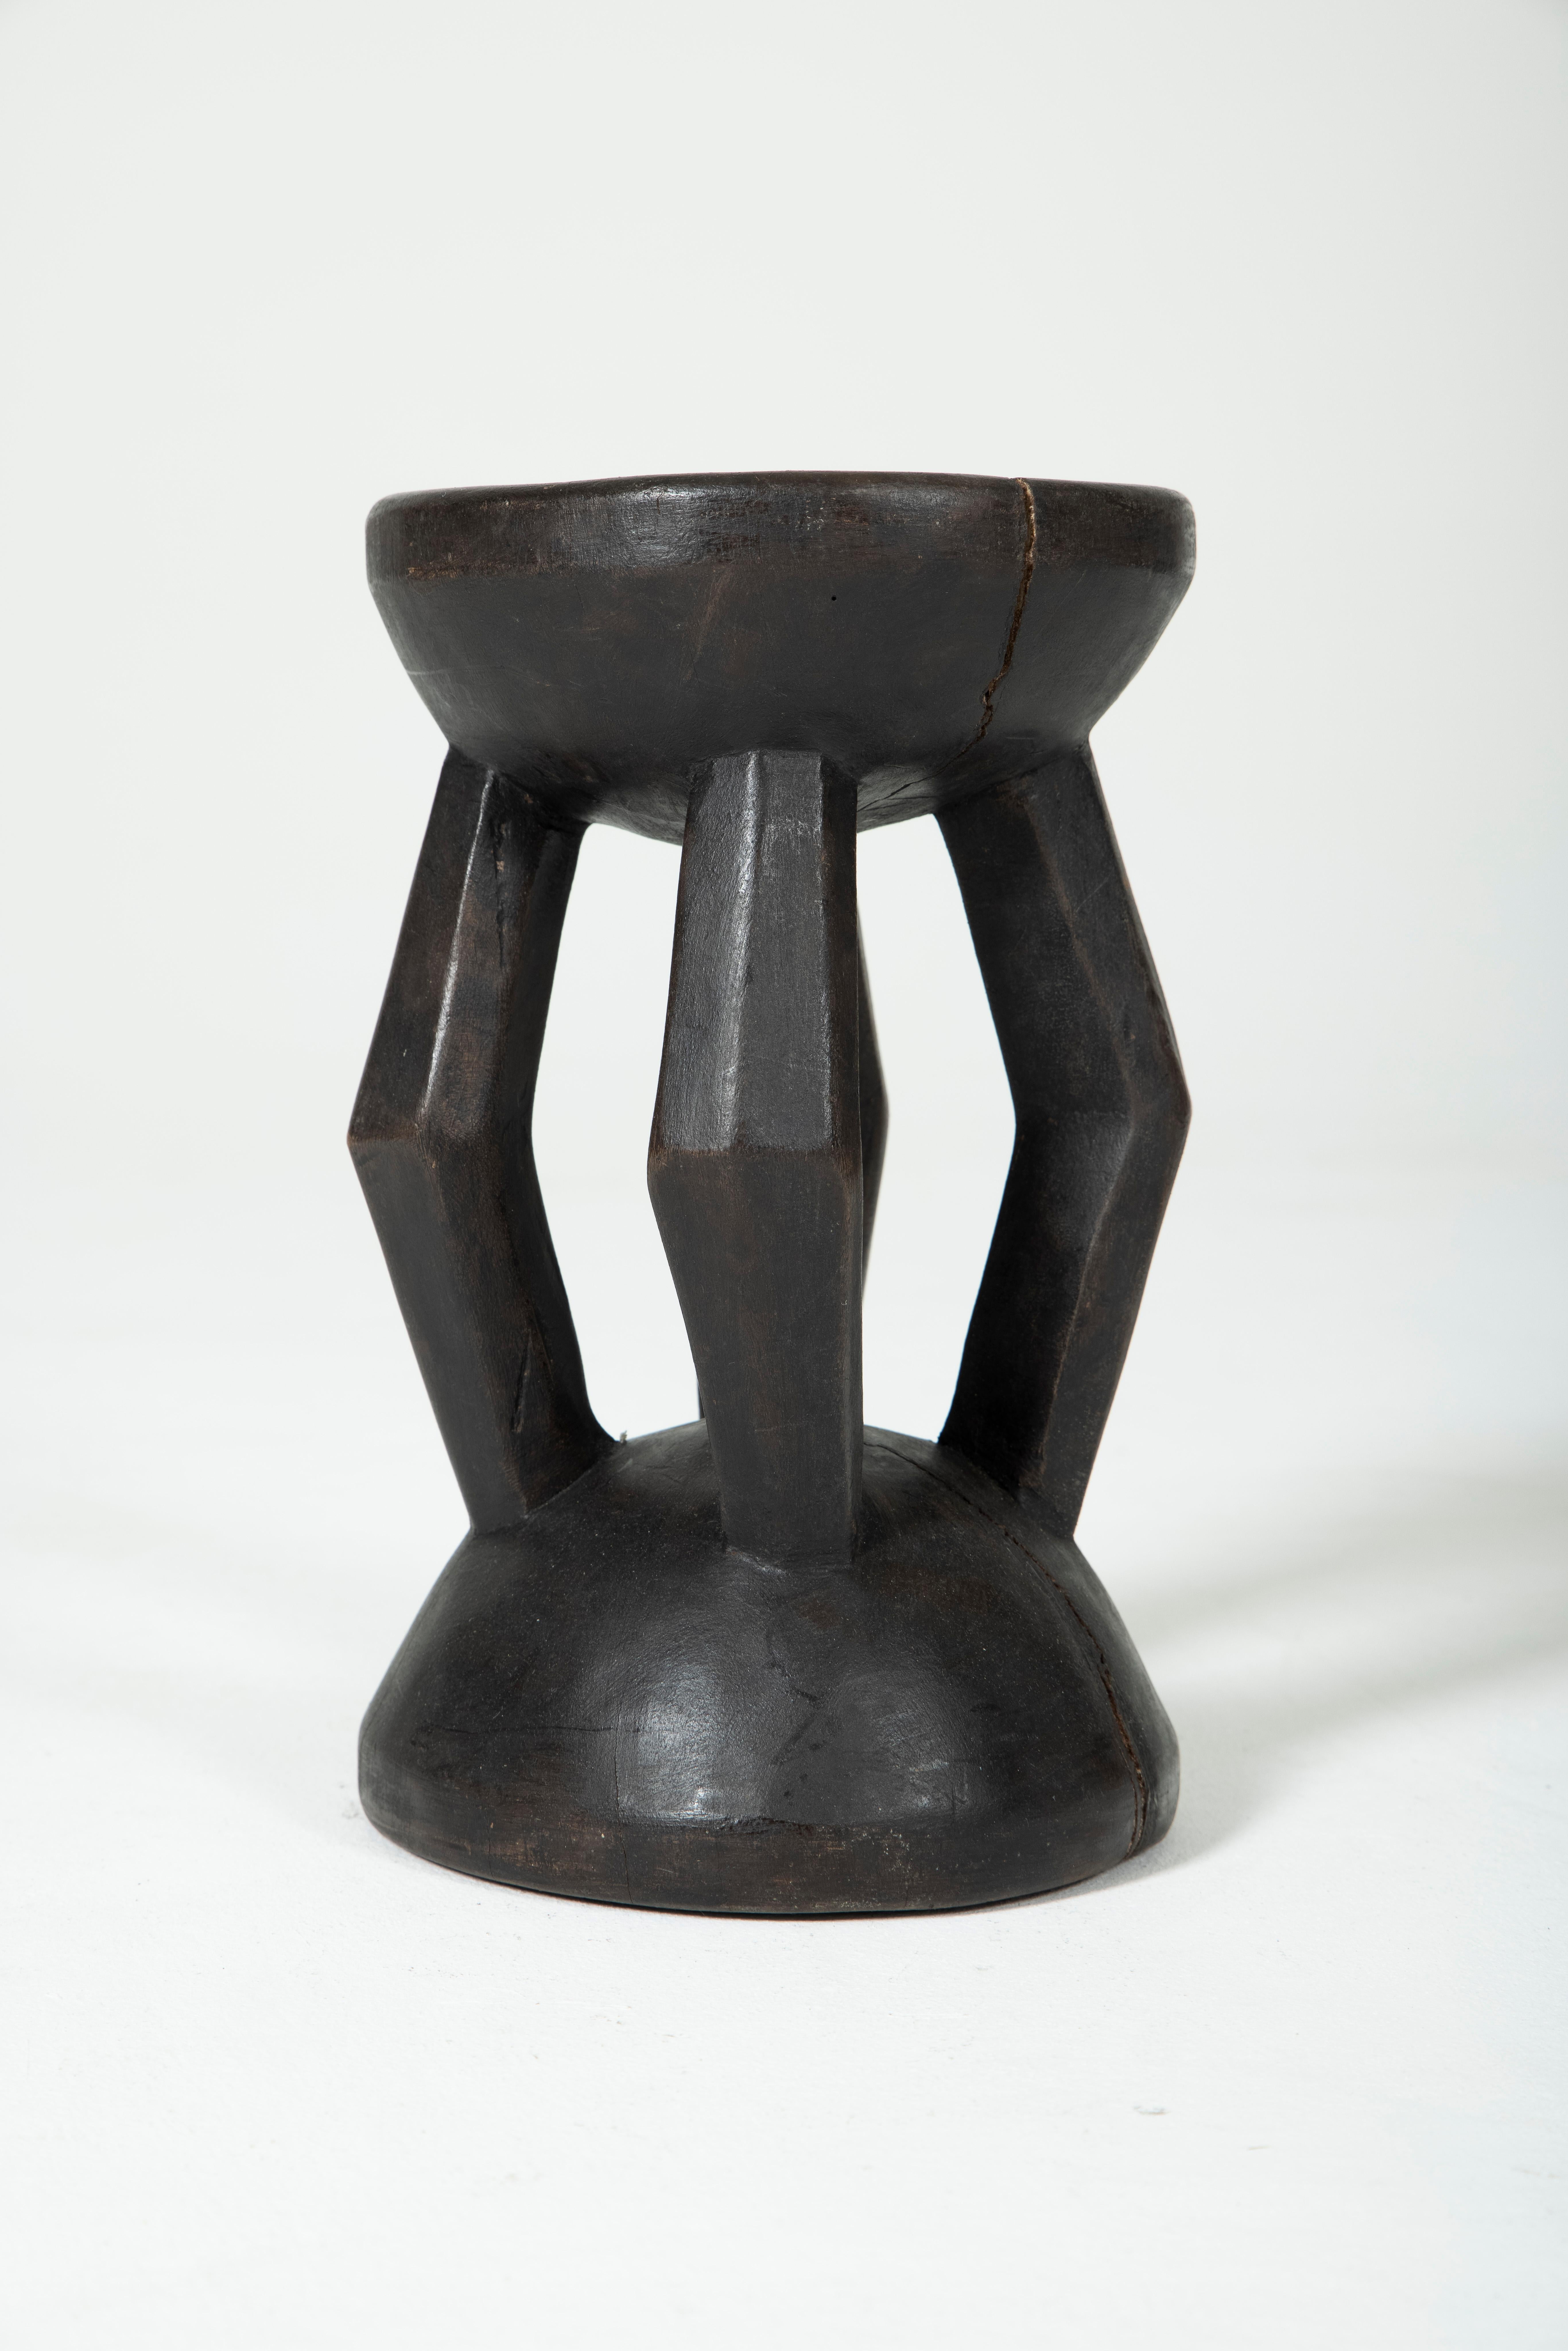 Wood Stool or Side Table Dogon